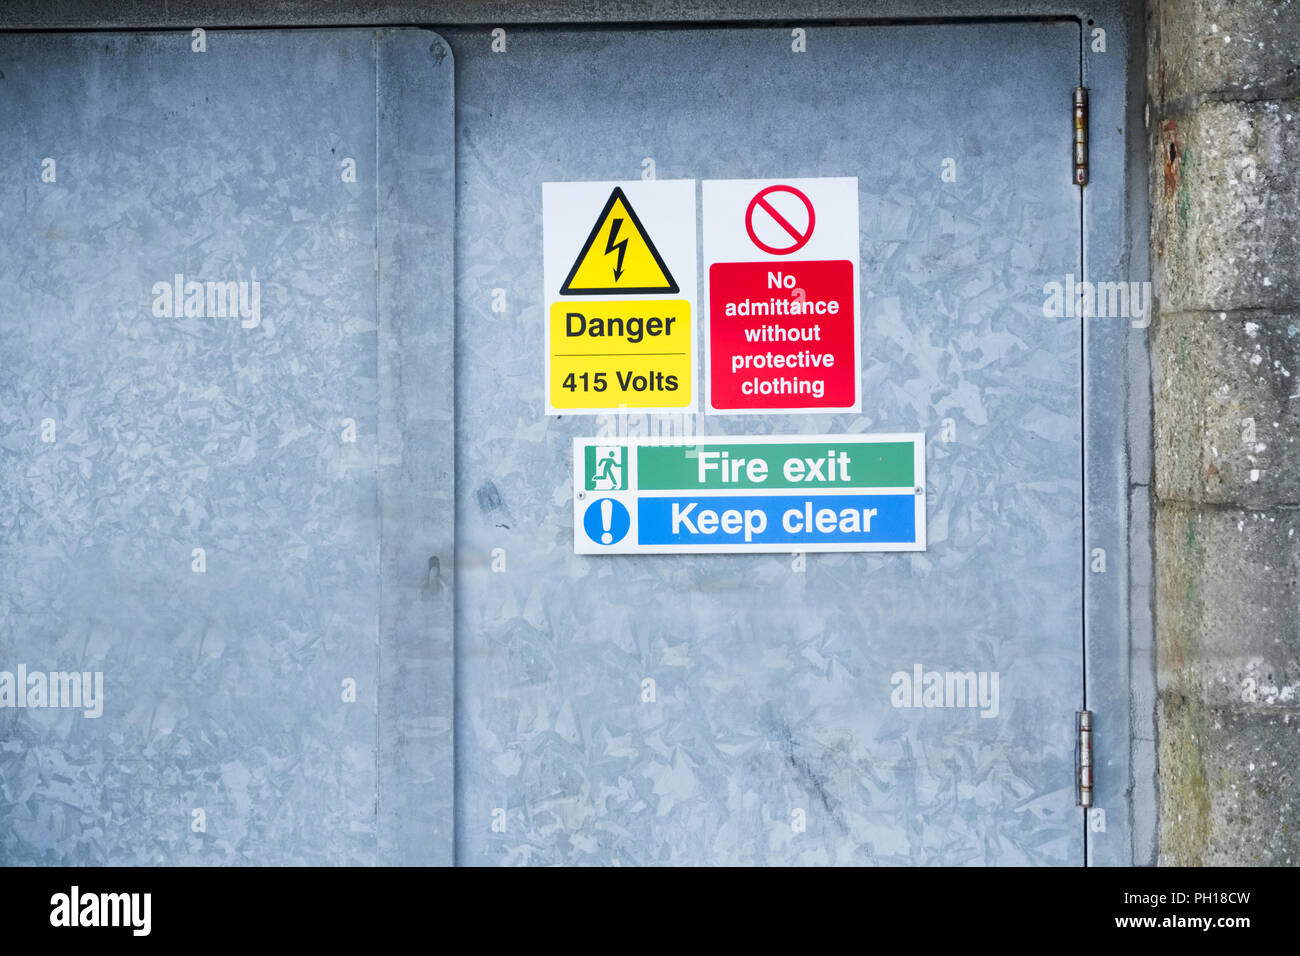 Danger high voltage keep clear fire exit sign on metal door Stock Photo